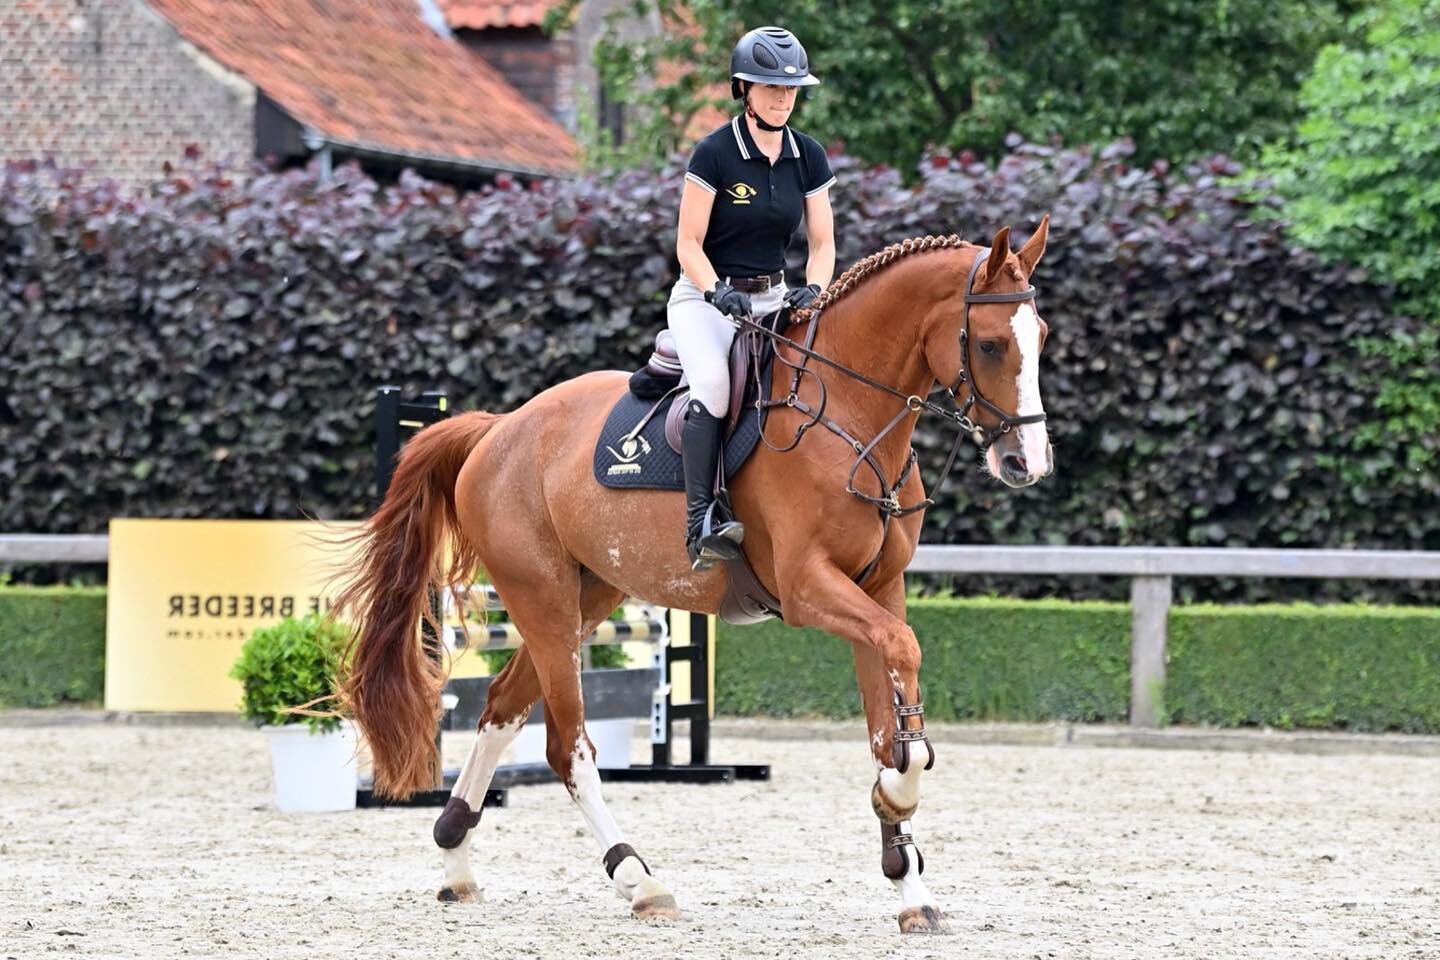 &bull; Sold! &bull; Best of luck in your new home! &bull; 
&bull;
&bull;
&bull;
&bull;
&bull;
&bull;
&bull;
&bull;
&bull;
&bull;
&bull;
&bull;
&bull;
&bull;
&bull;
&bull;
&bull;
&bull;
#horsetraining #showjumping #horsesforsale #showjumpersforsale #U